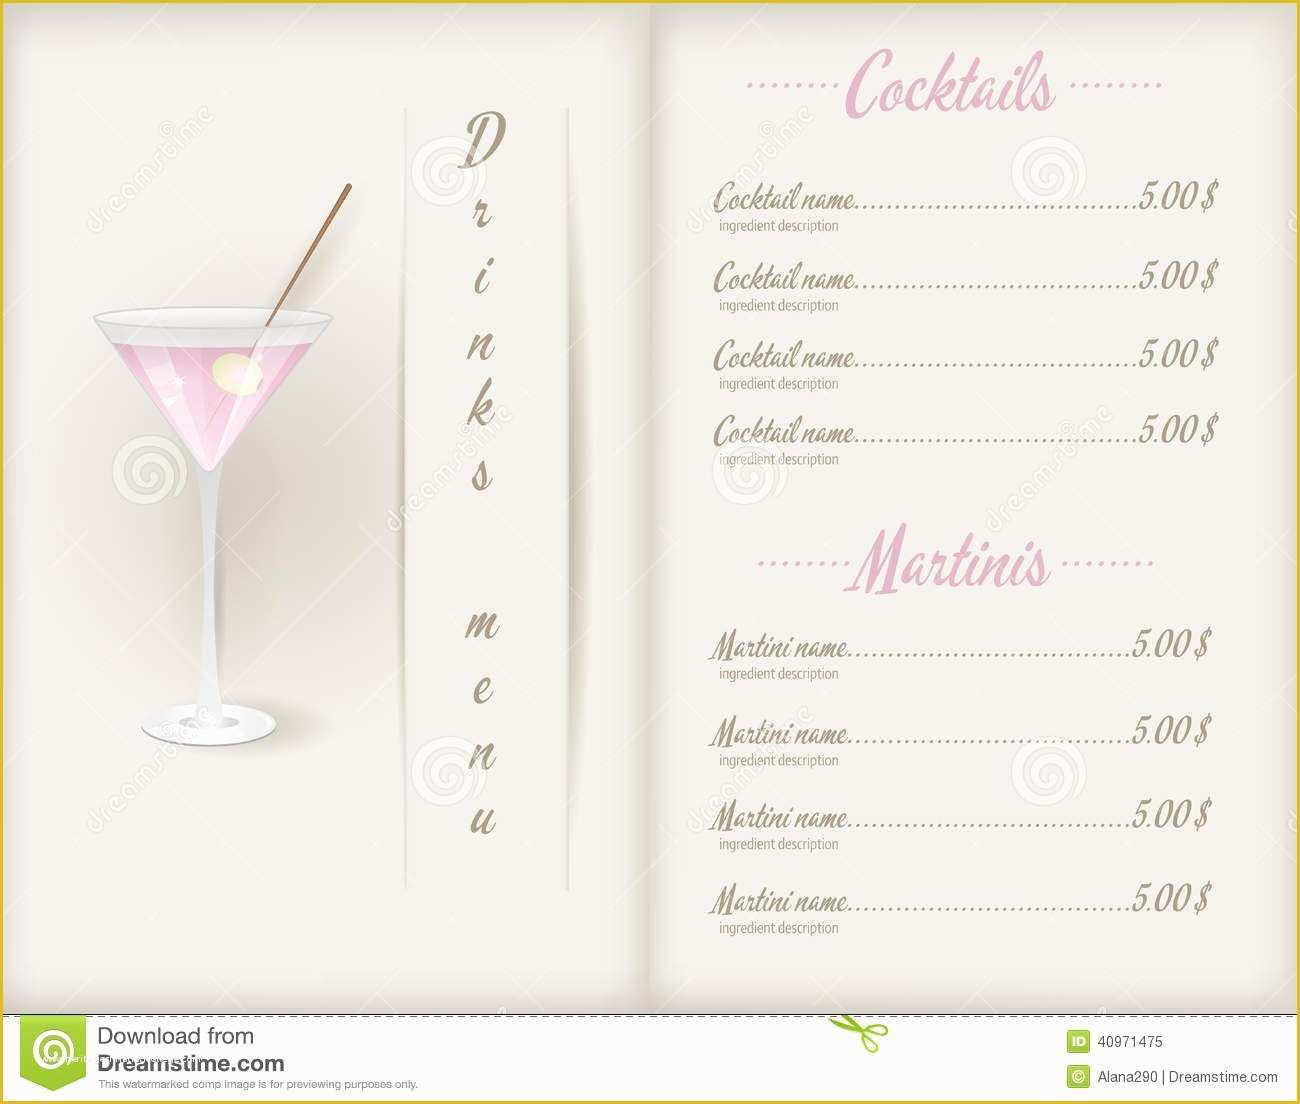 Drinks Menu Template Free Download Of Drink Menu Template Stock Vector Illustration Of Party